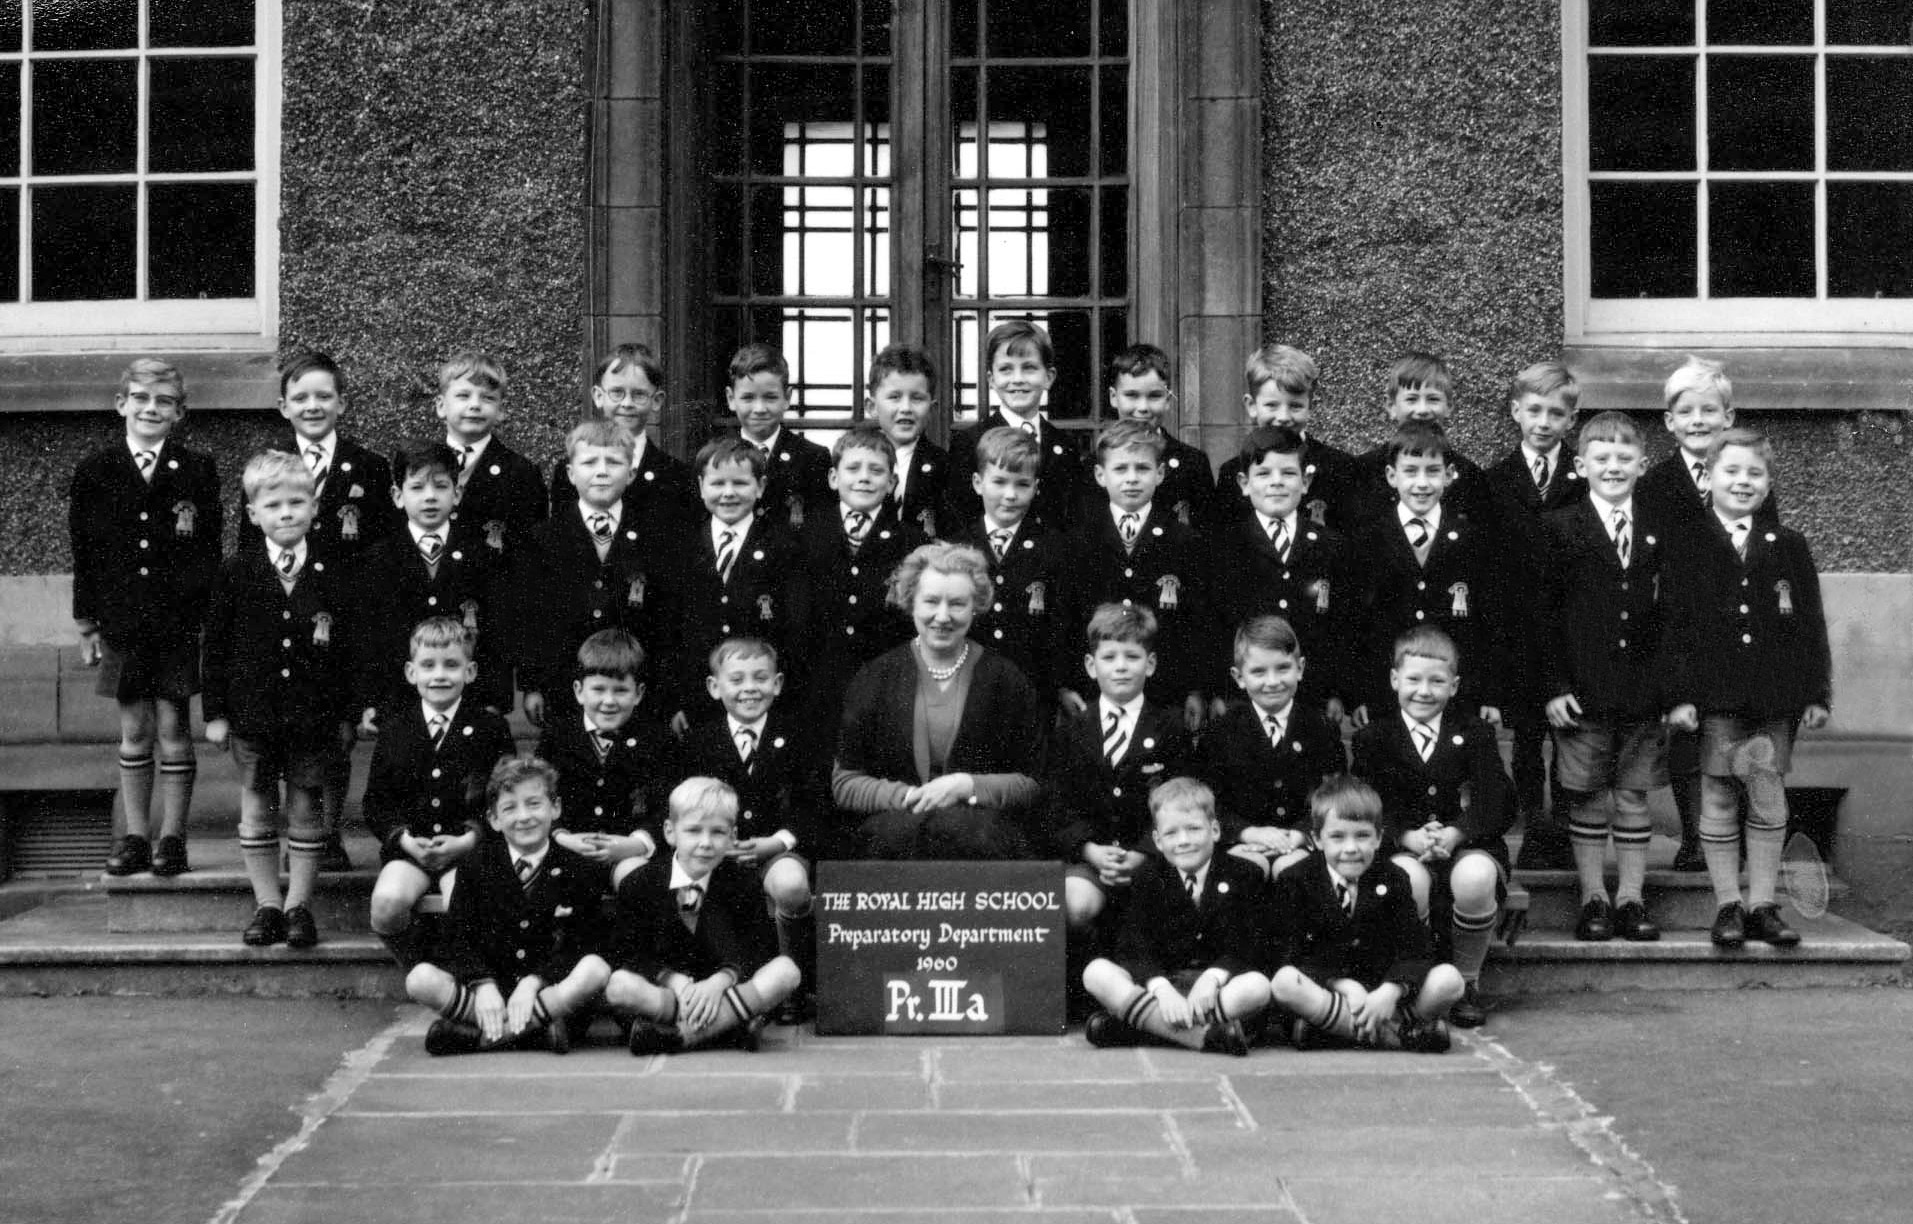 I must be slightly younger than Angus - started at Royal High Preparatory, Edinburgh in 1958. This is our Class photo from 1960, Our Classmistress was Miss Barnet. It's very 'Just William' I think... View full size.